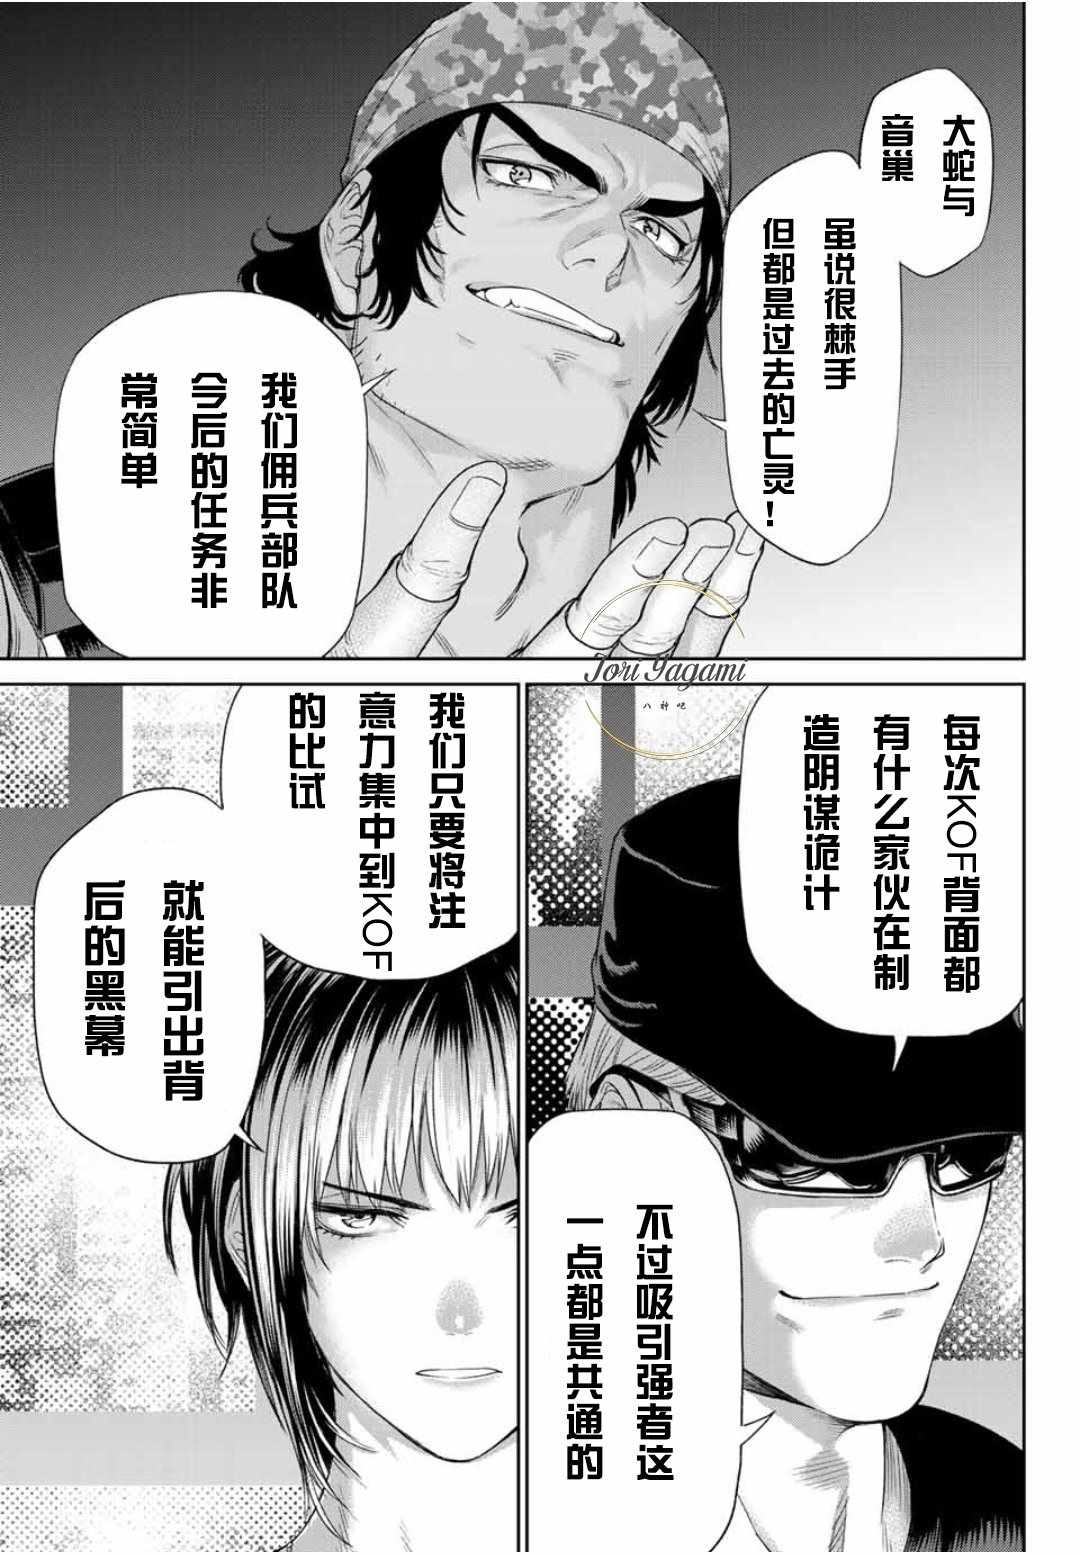 《THE KING OF FIGHTERS～A NEW BEGINNING～》漫画 ANEWBEGINNING 029话